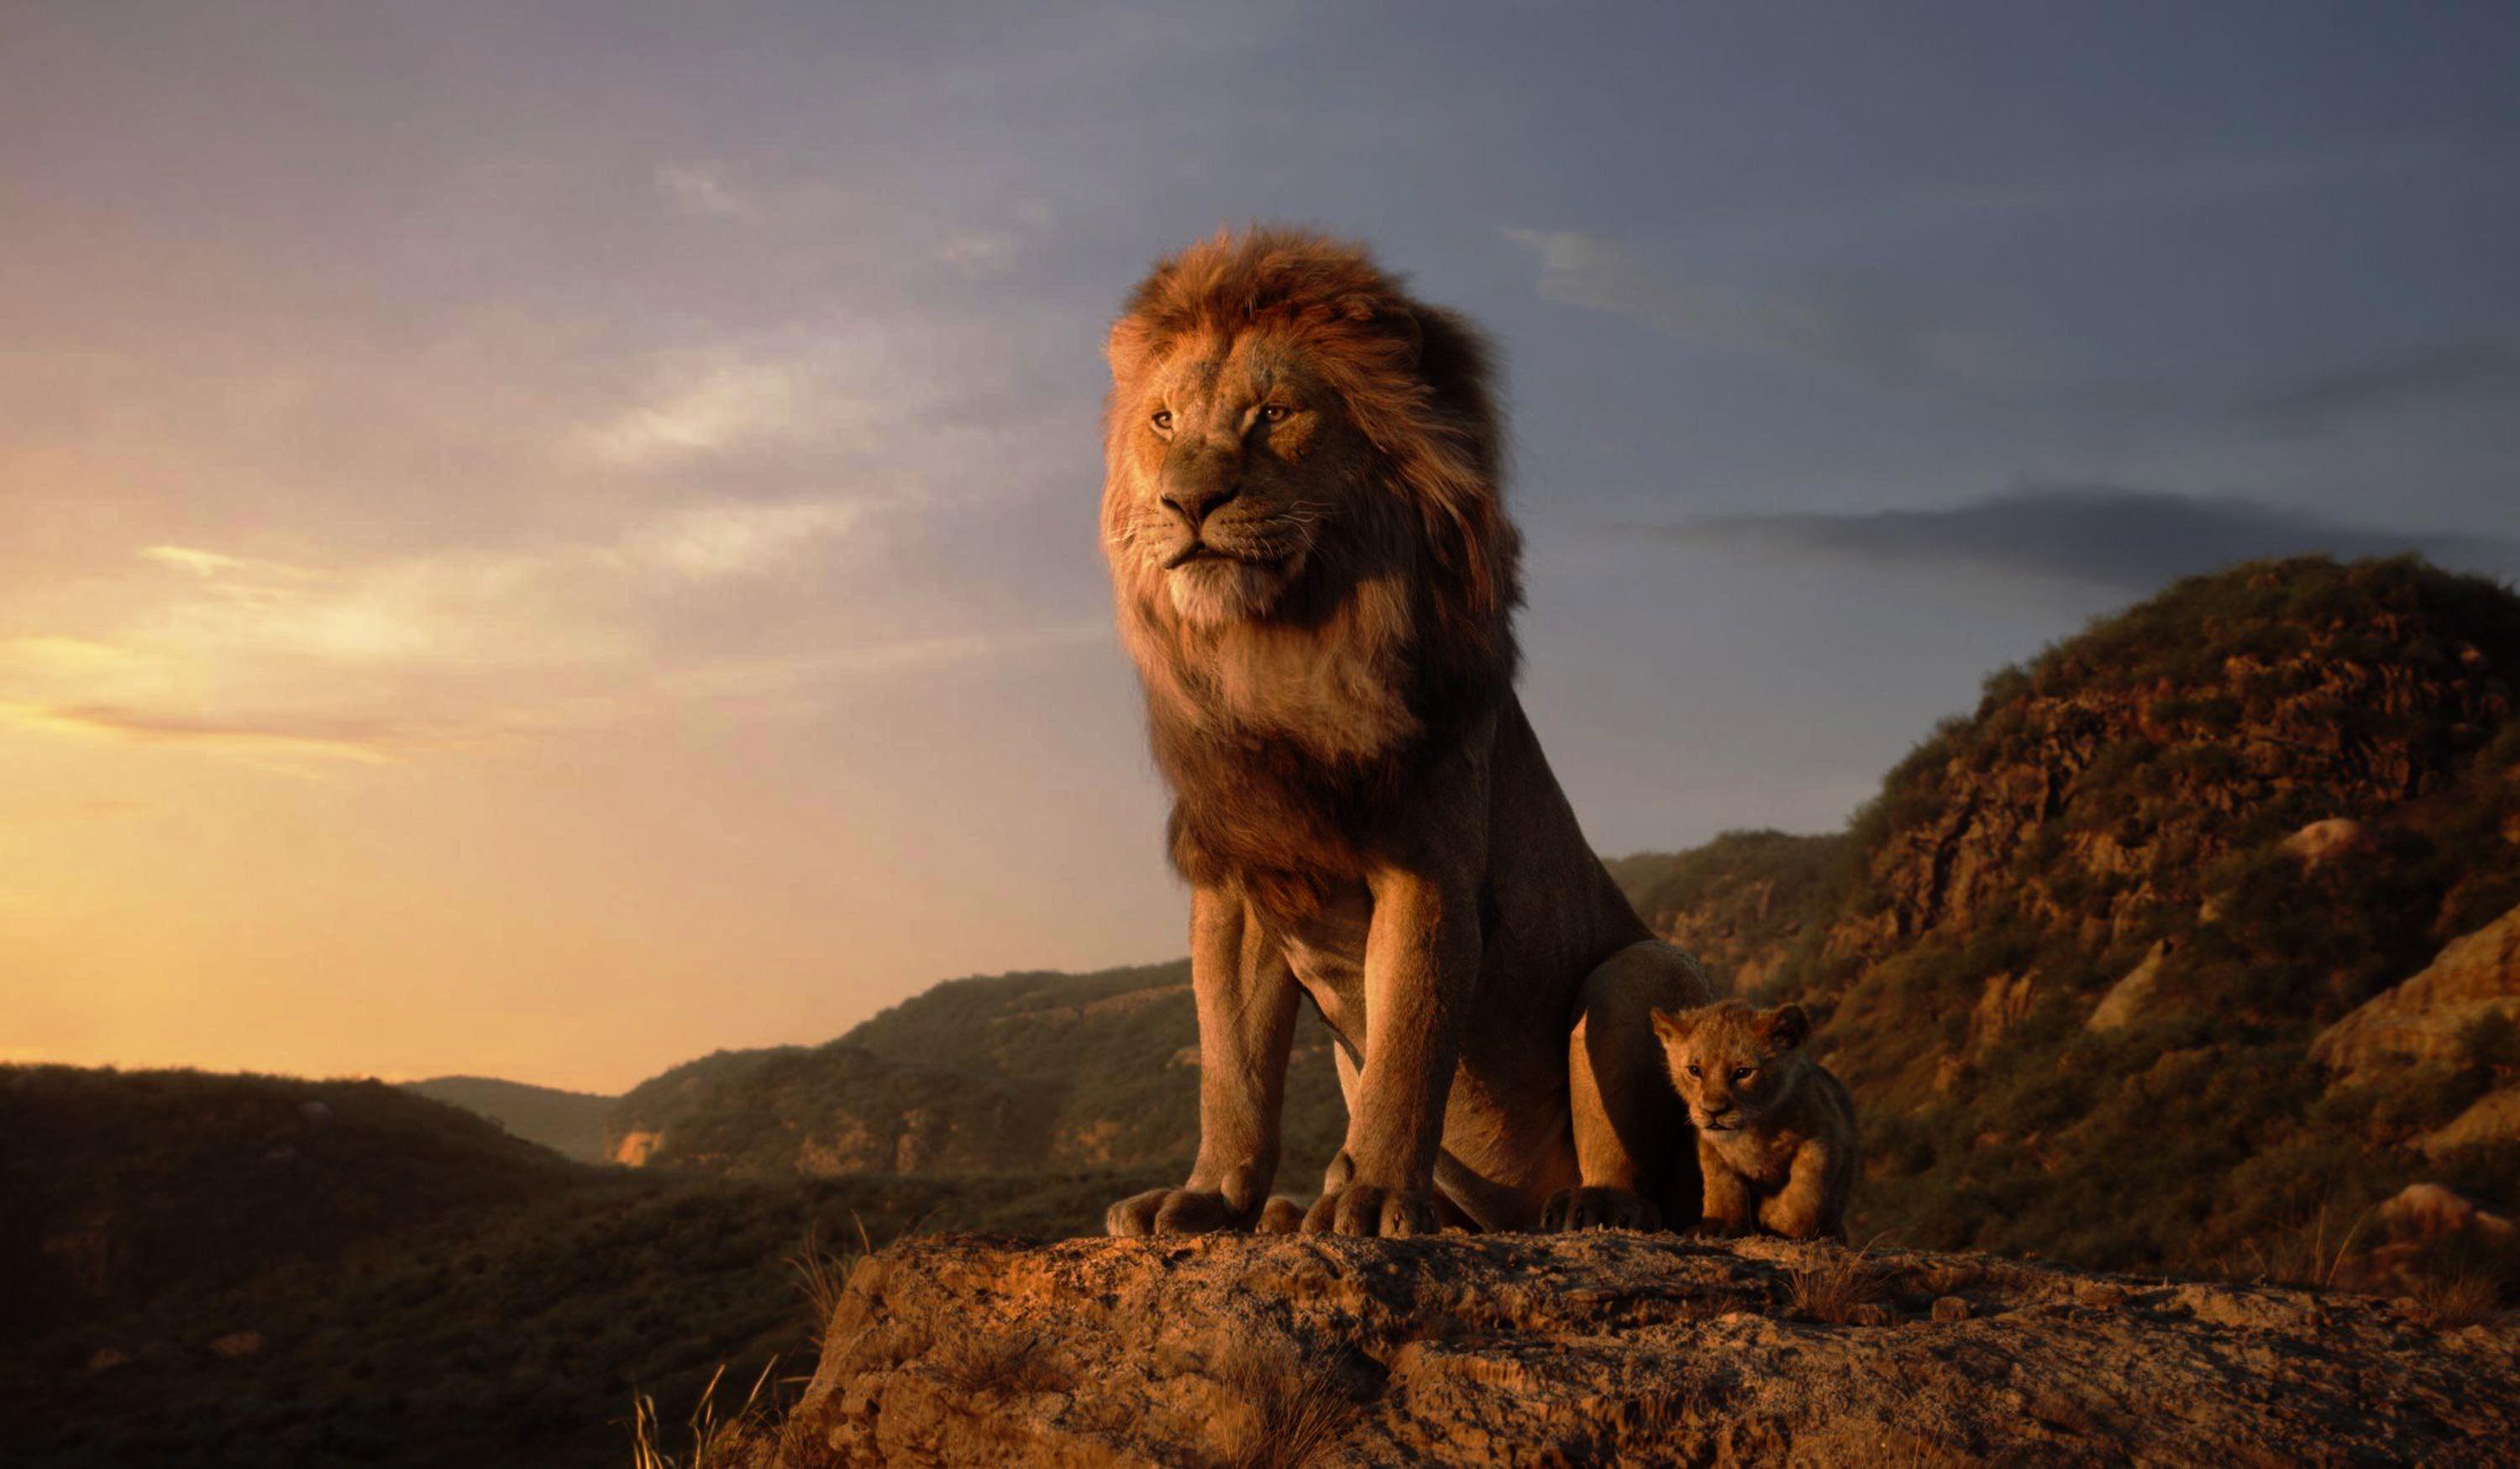 The Lion King 19 Wallpapers Top Free The Lion King 19 Backgrounds Wallpaperaccess